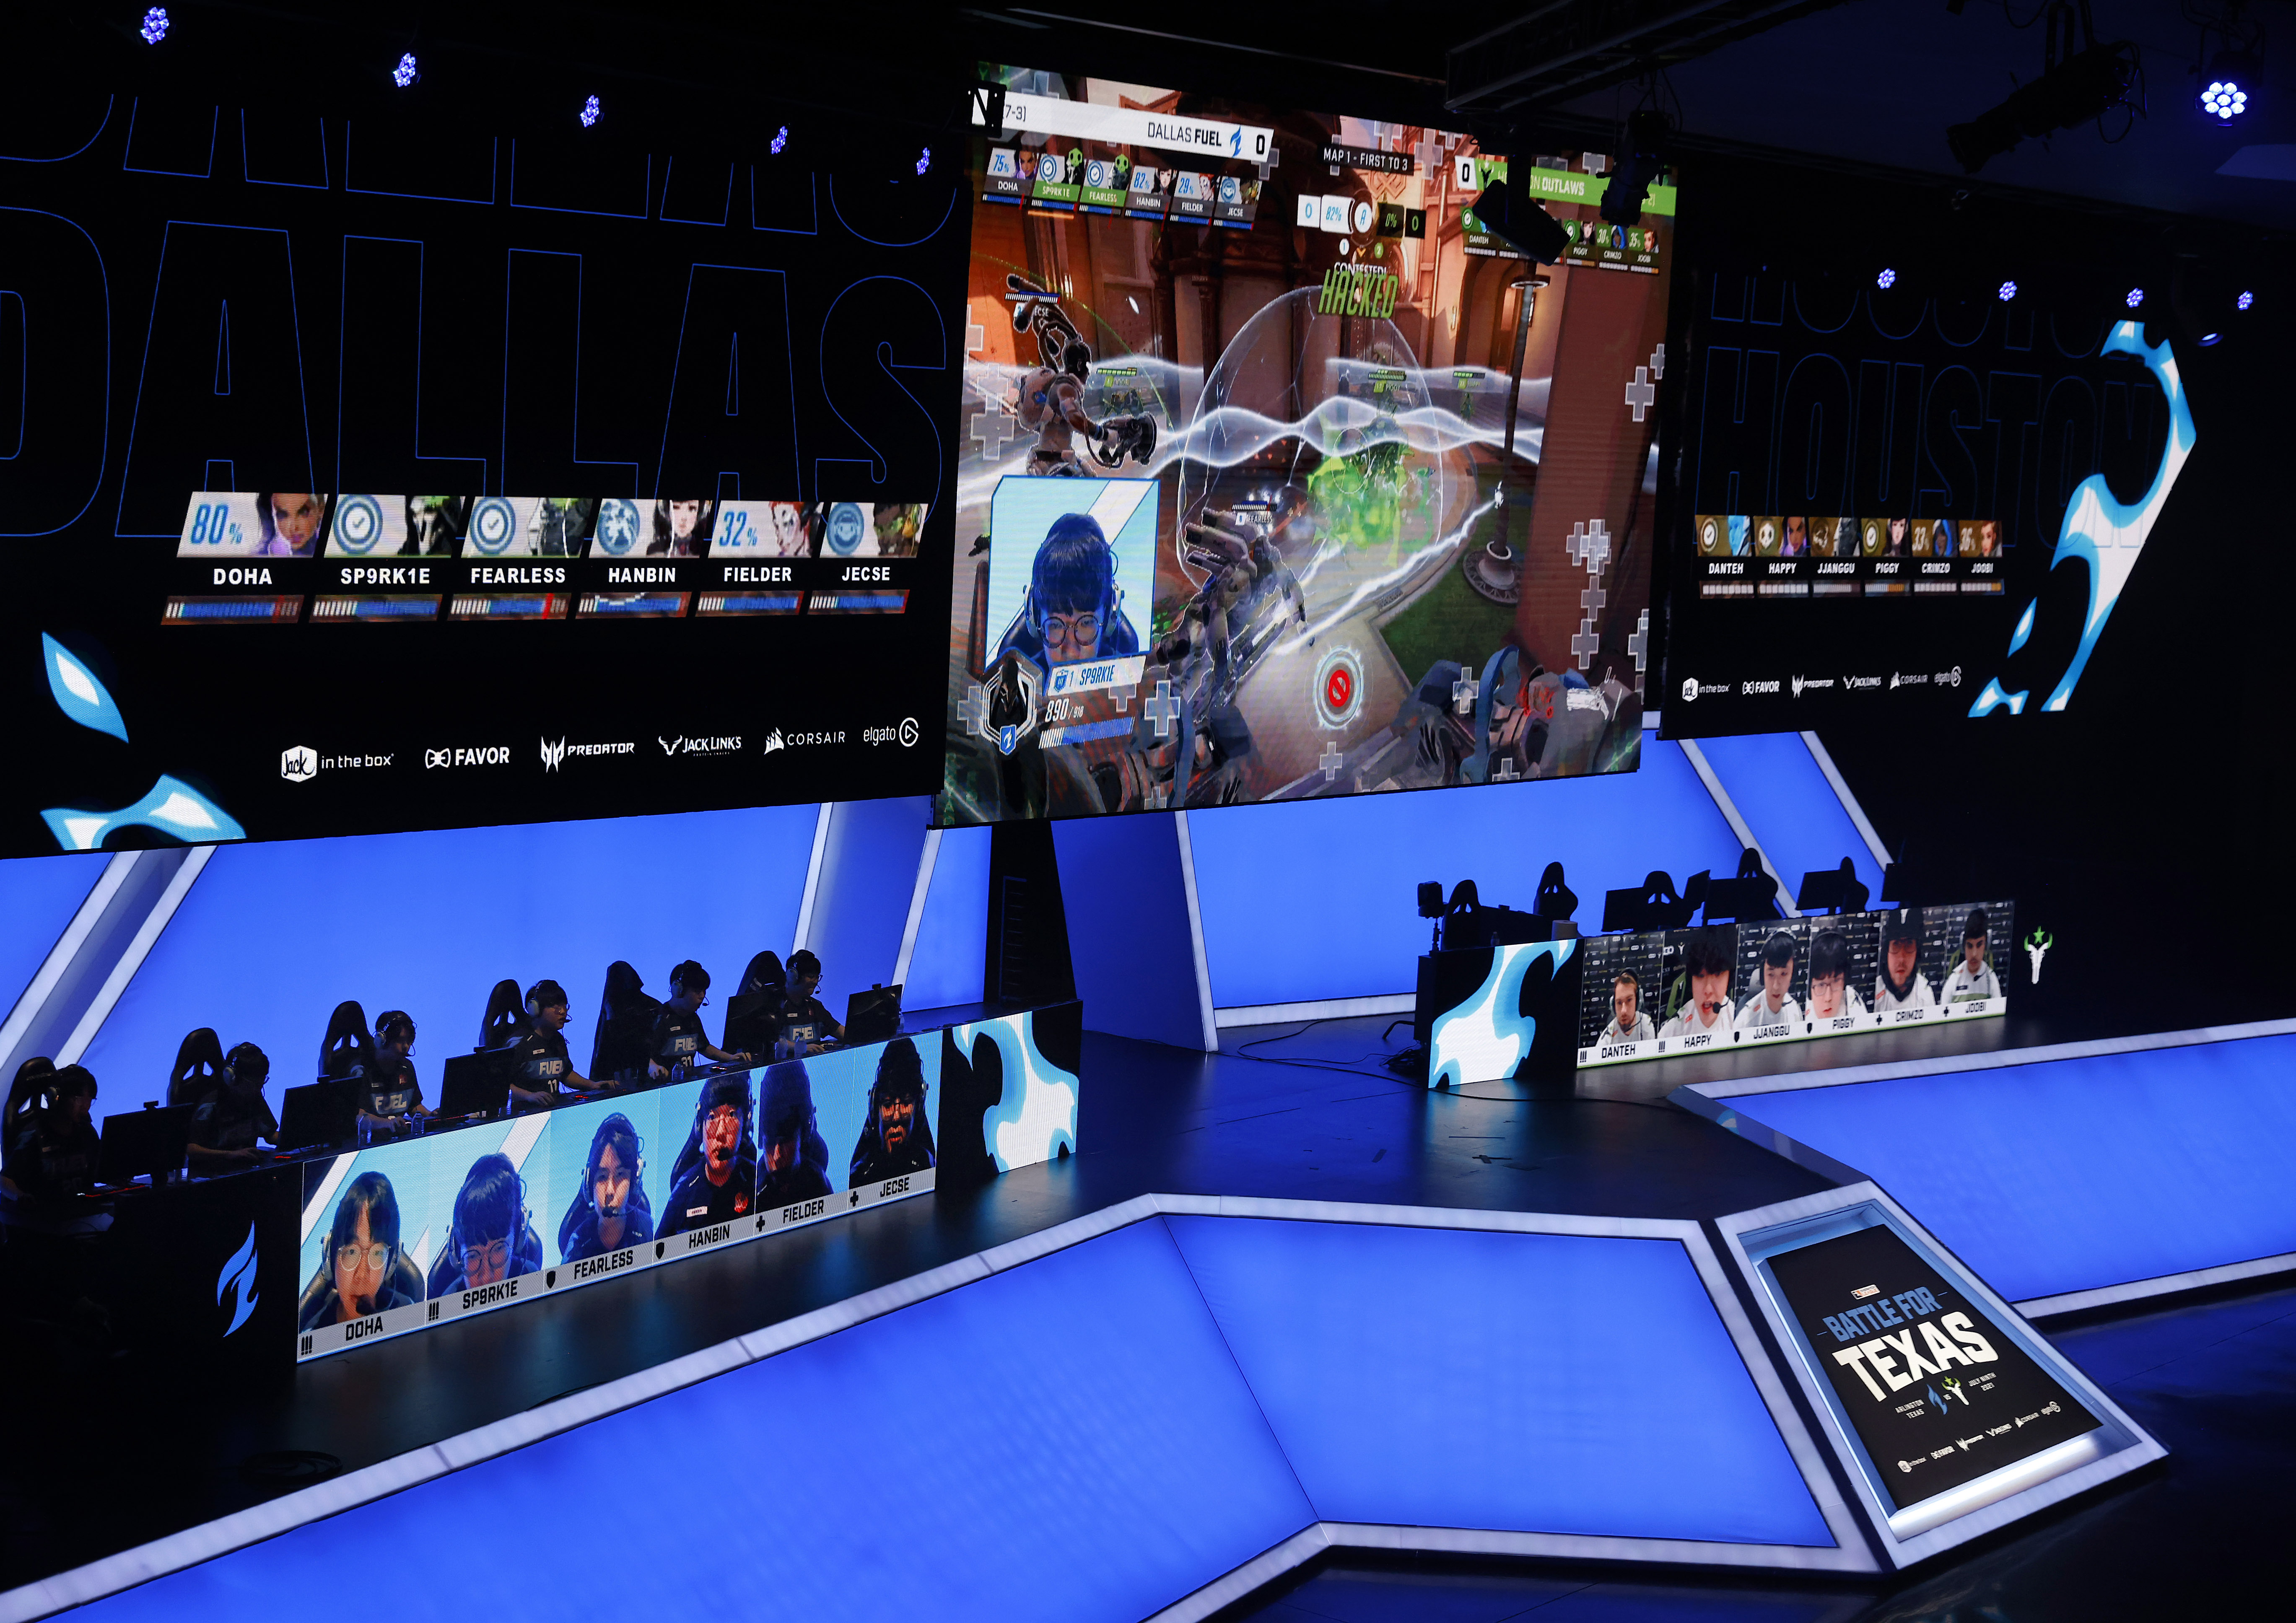 How to watch Overwatch League matches like a pro, become better player